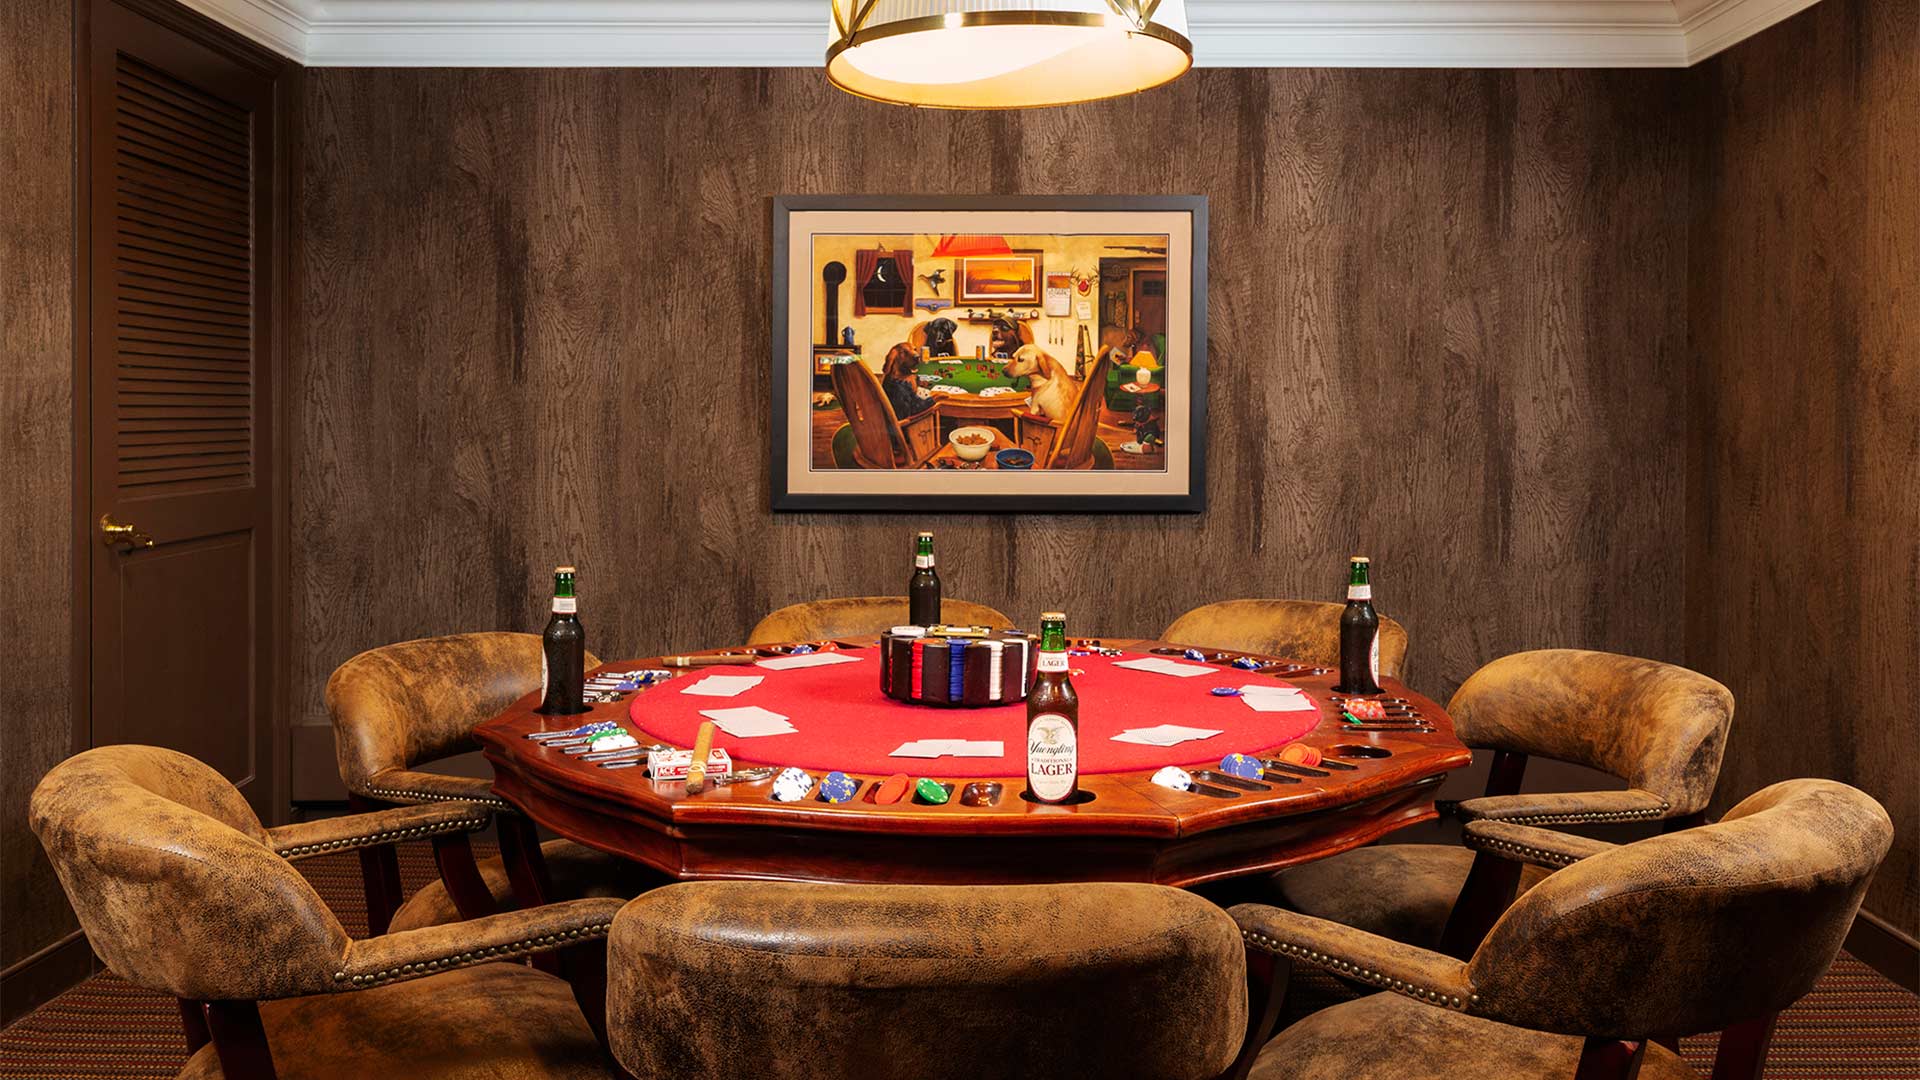 interior shot of a card room. The room has dark wood panels on the walls and the poker table is round and red. There are several plush chairs around the table